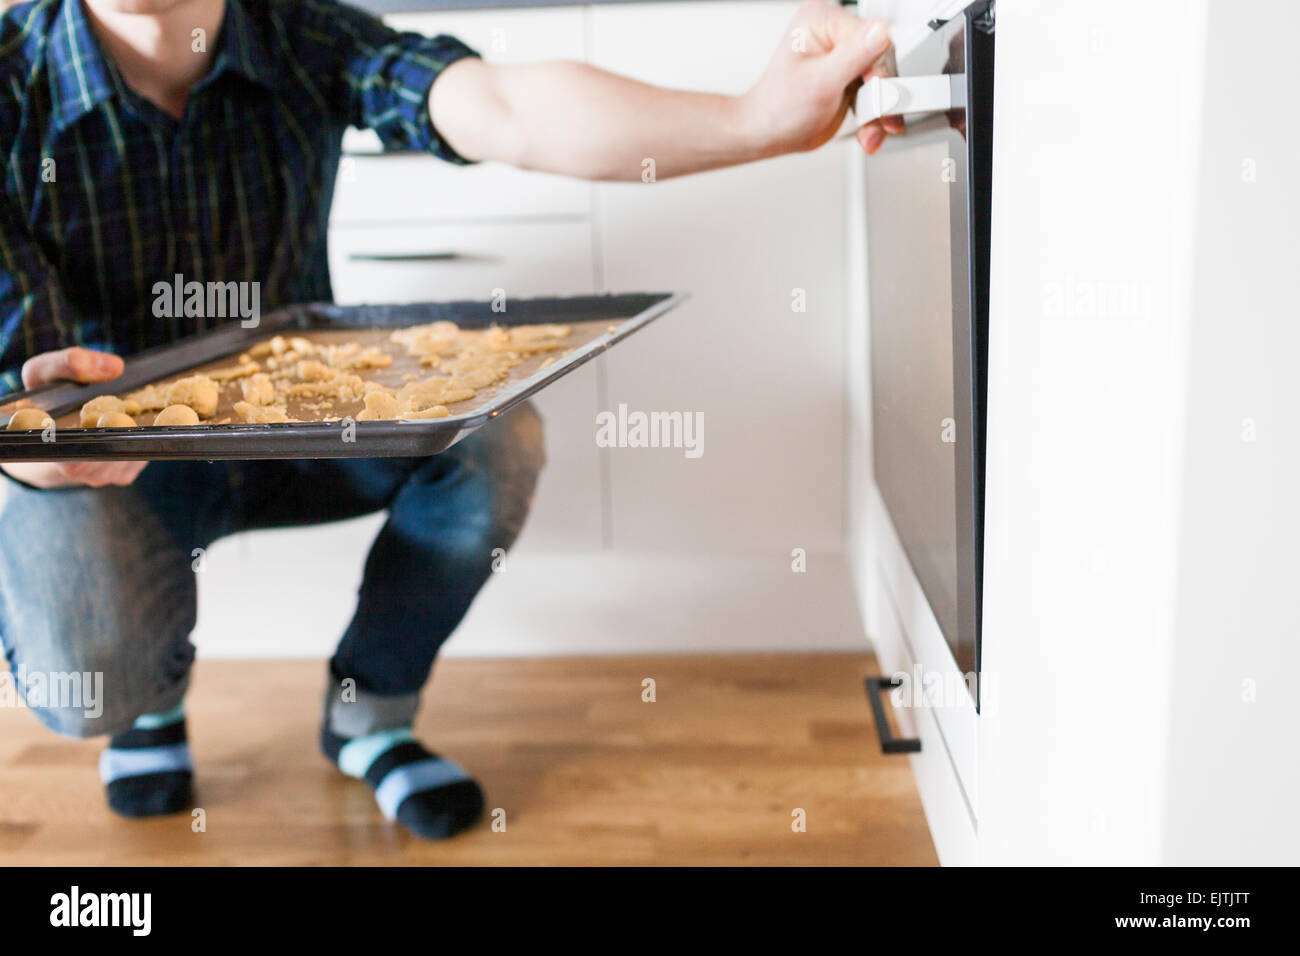 Low section of man putting baking tray in oven Stock Photo